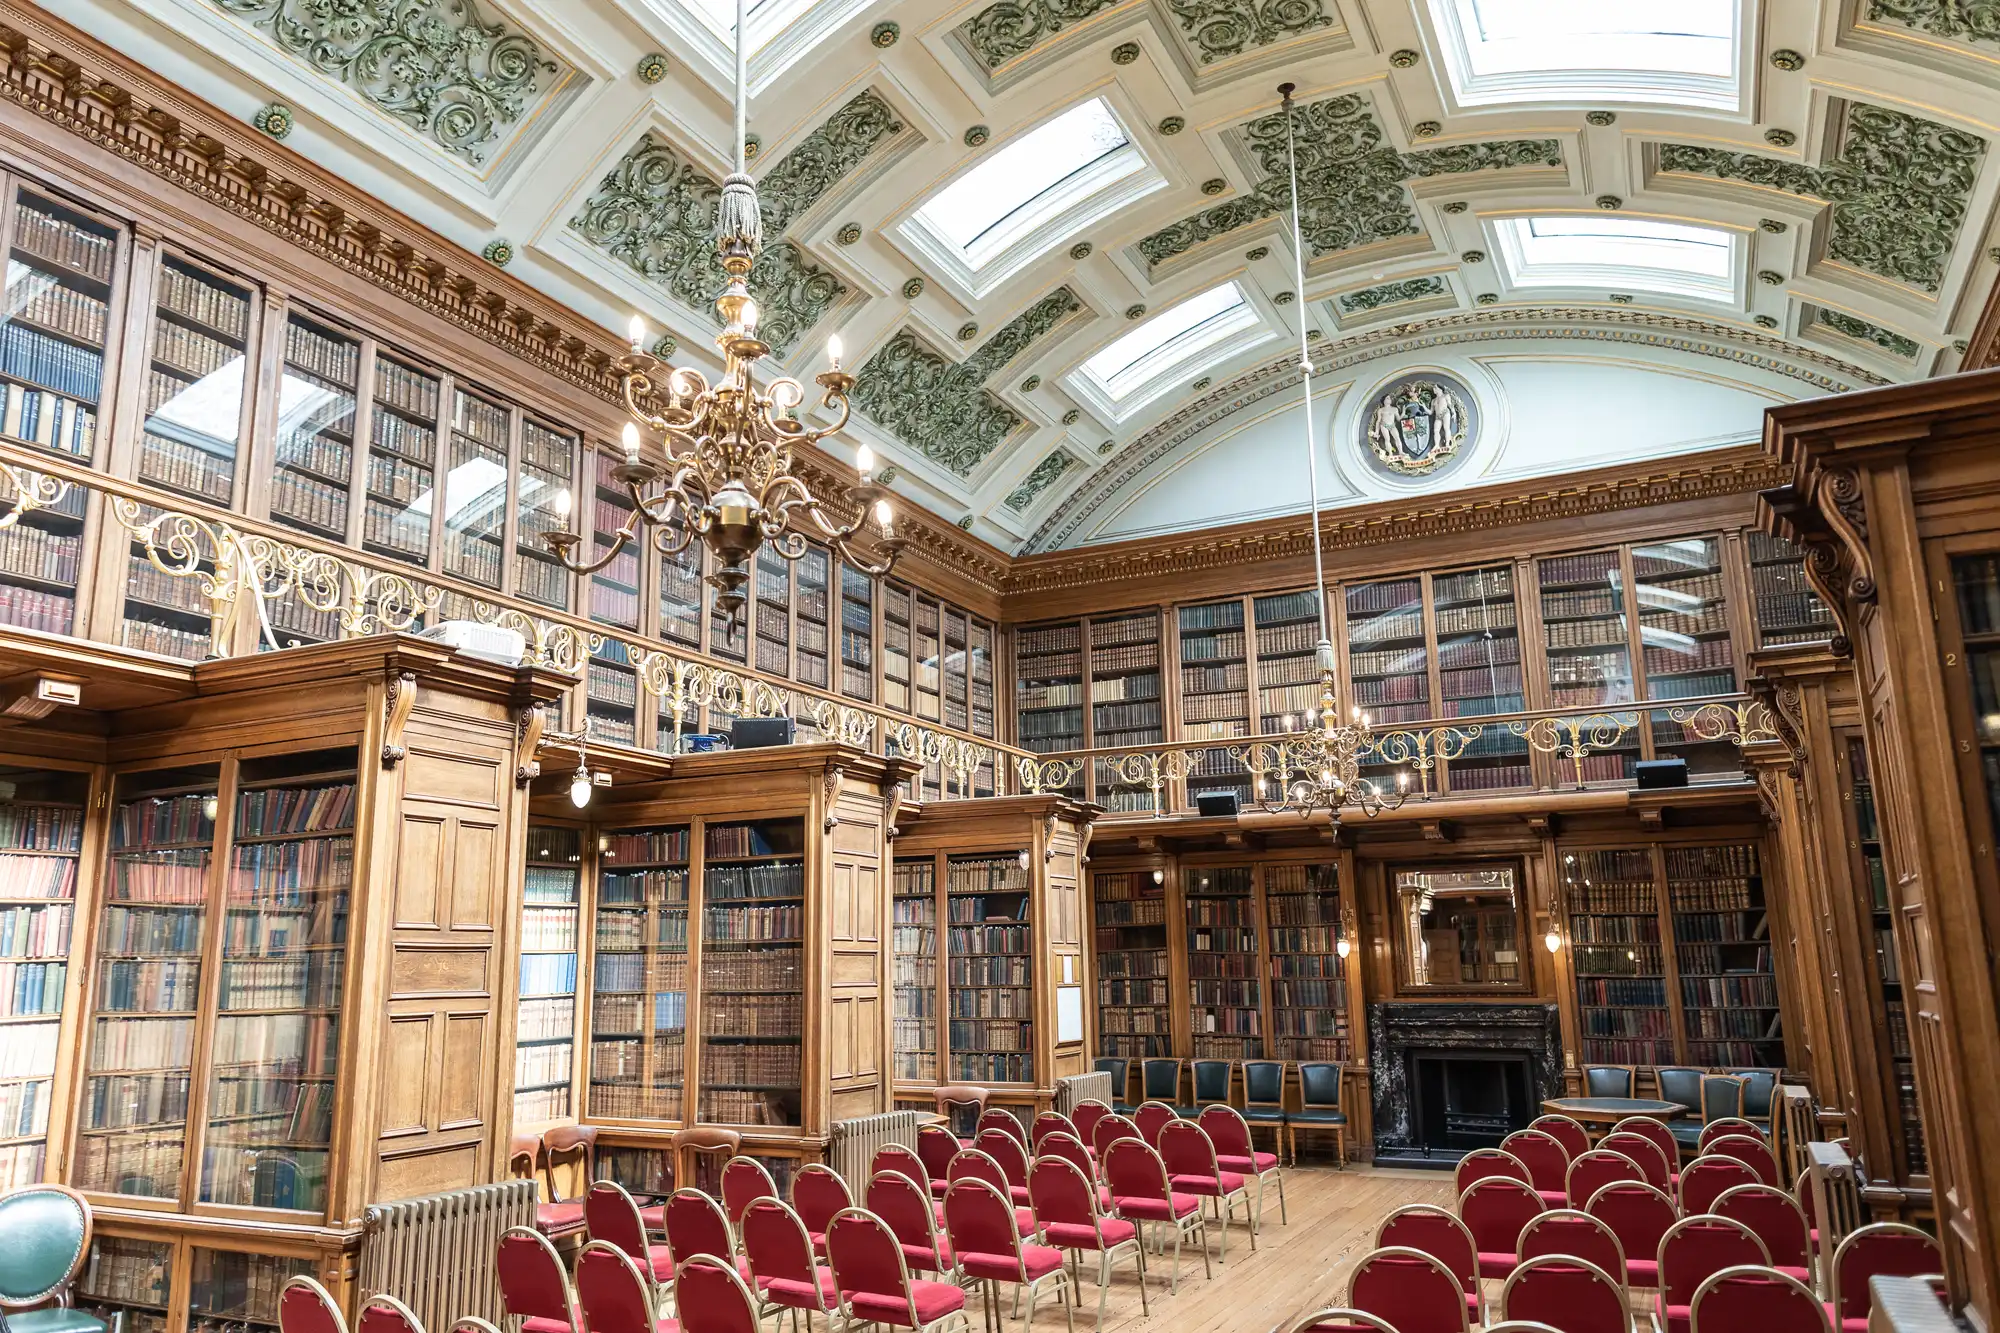 A grand library room with ornate ceiling, wooden bookshelves filled with books, and red chairs arranged in rows facing a fireplace and podium. Chandeliers hang from the high ceiling.